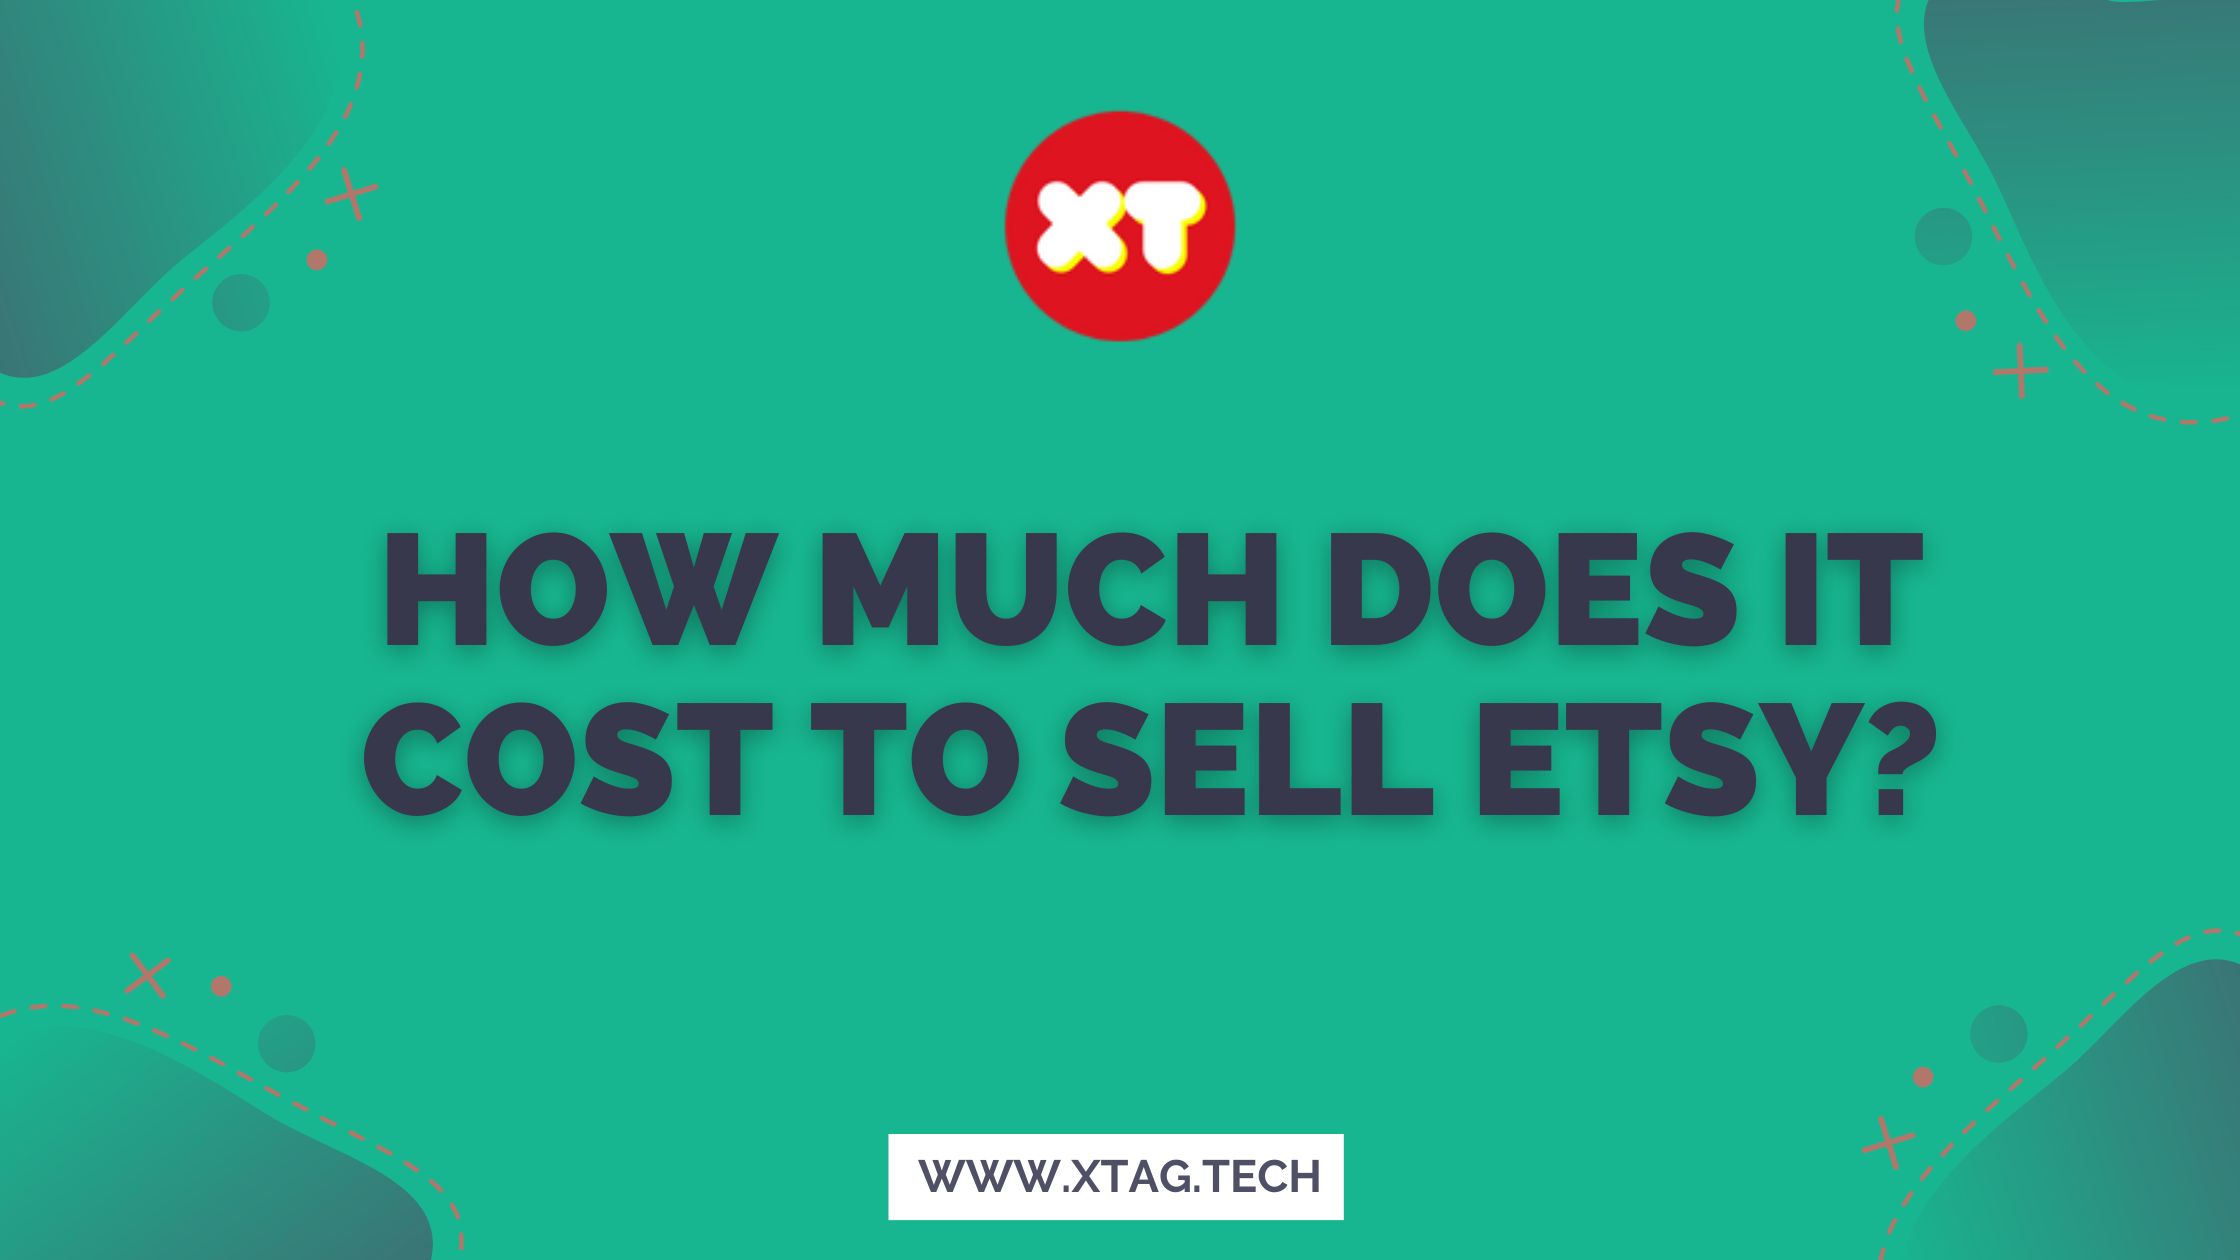 How Much Does It Cost To Sell Etsy?